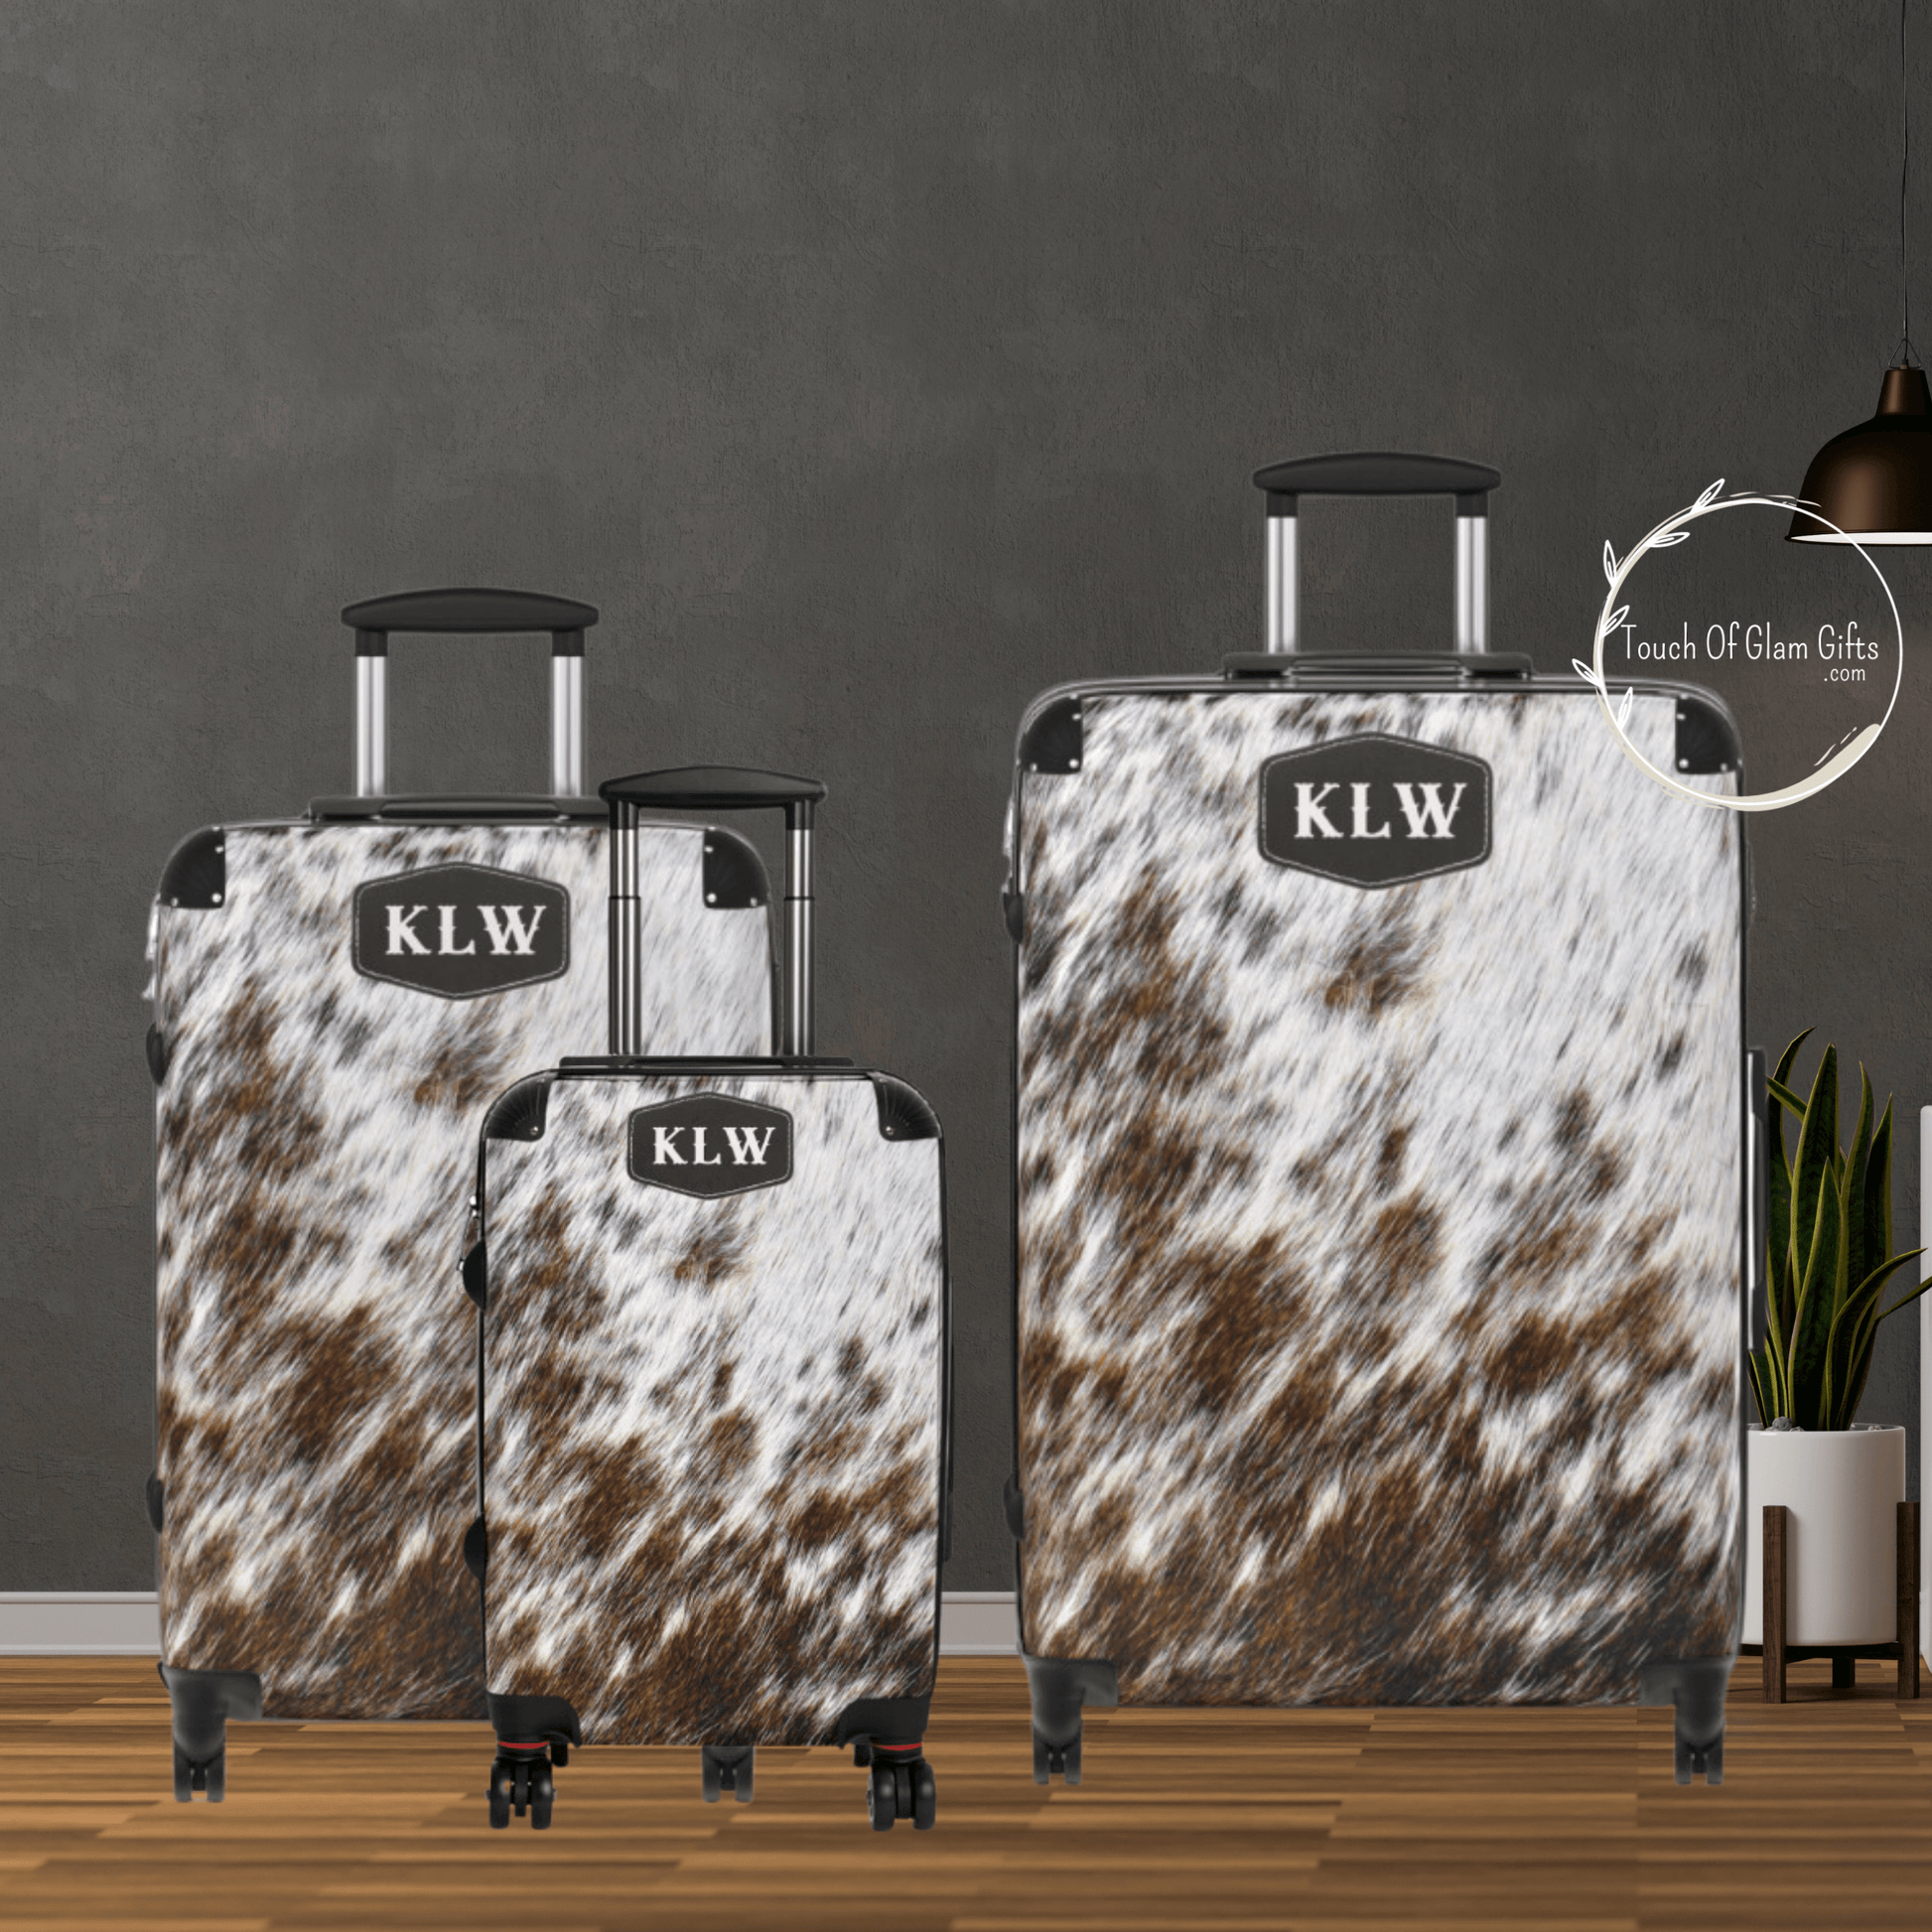 a dark wall backdrop really makes this light off white cowhide with brown spots really pop. This luggage set has the leather patch with 3 initials for a customized luggage look.